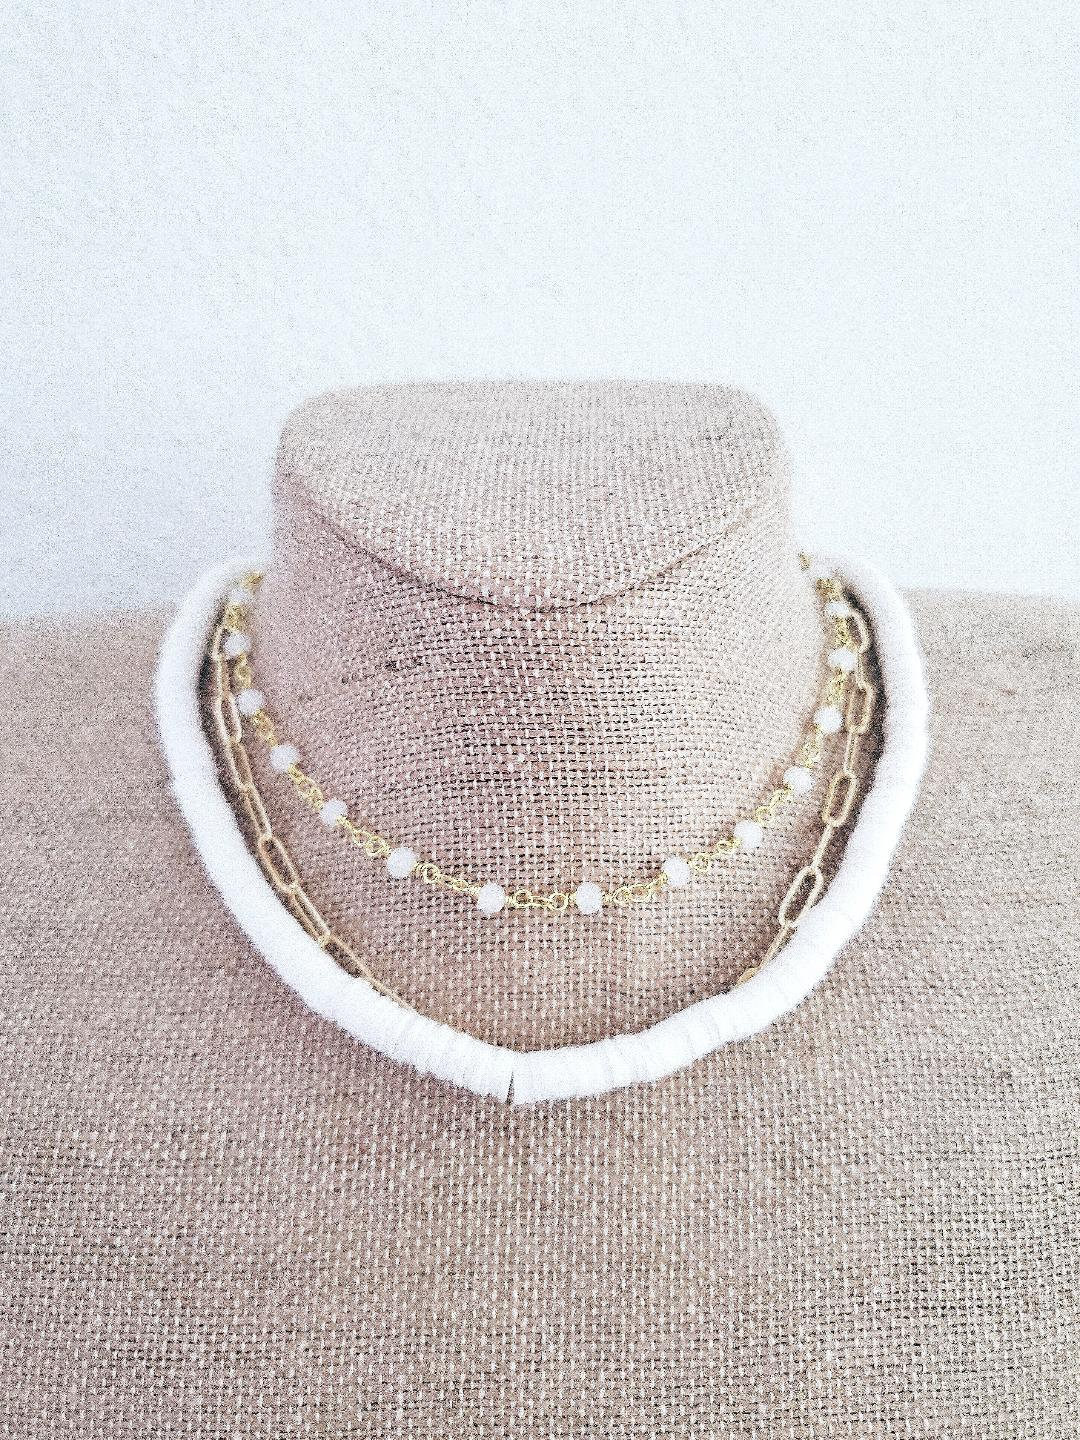 Amazon.com: BENBIYO Outer Star Banks Choker Necklace Layered Sarah OBX  Outerbanks Merch Inspired Jewelry (Gold): Clothing, Shoes & Jewelry